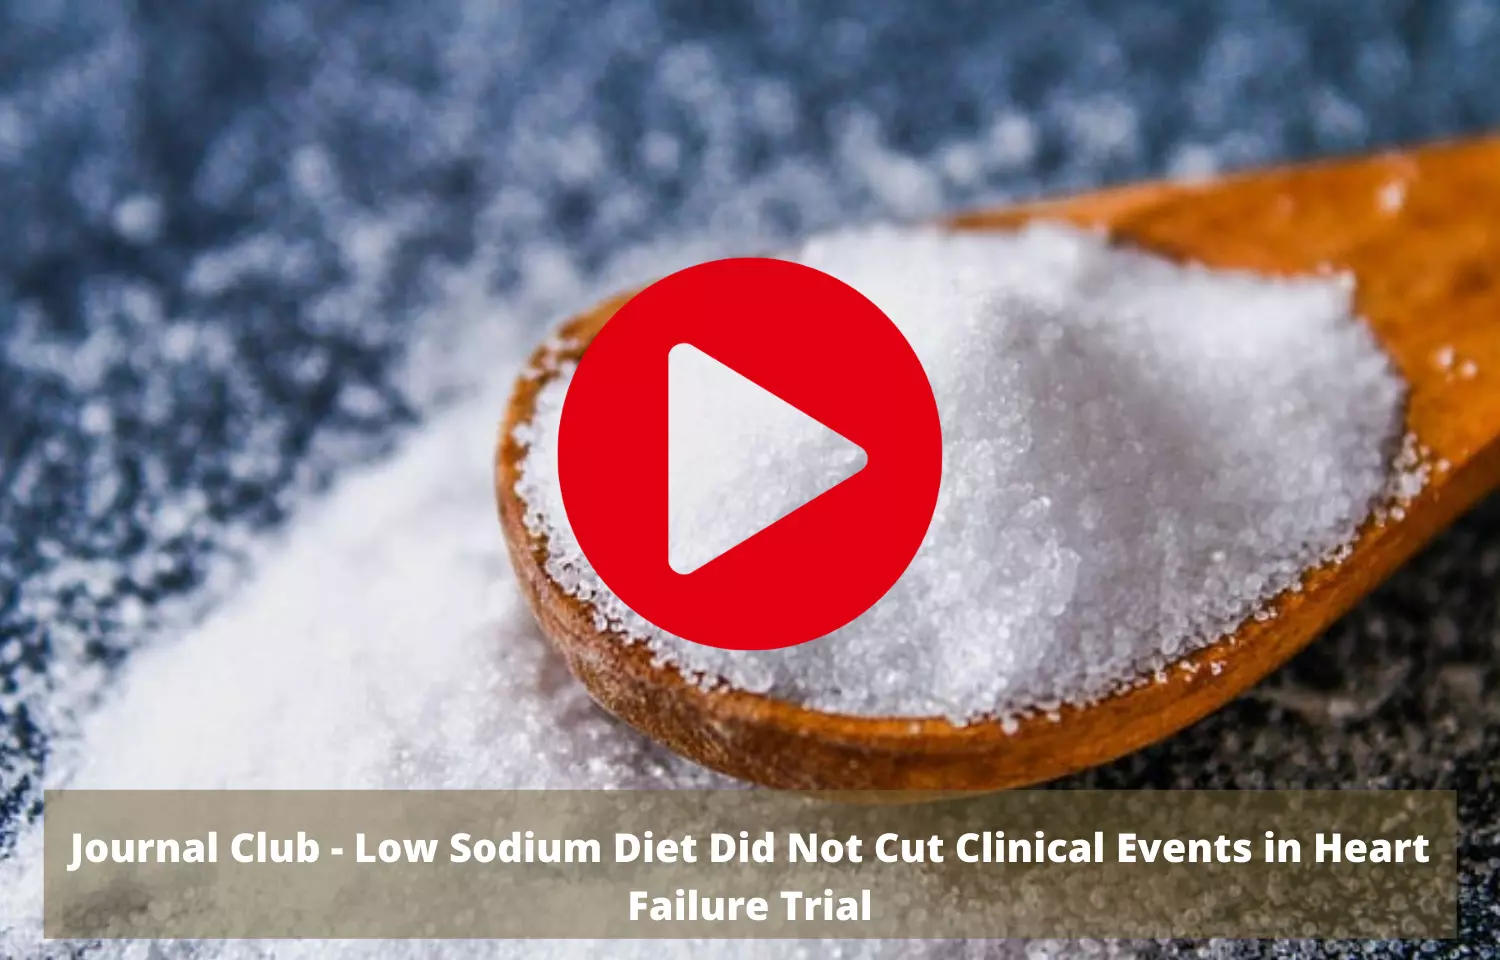 Journal Club - Low Sodium Diet might not Cut Clinical Events in Heart Failure Trial